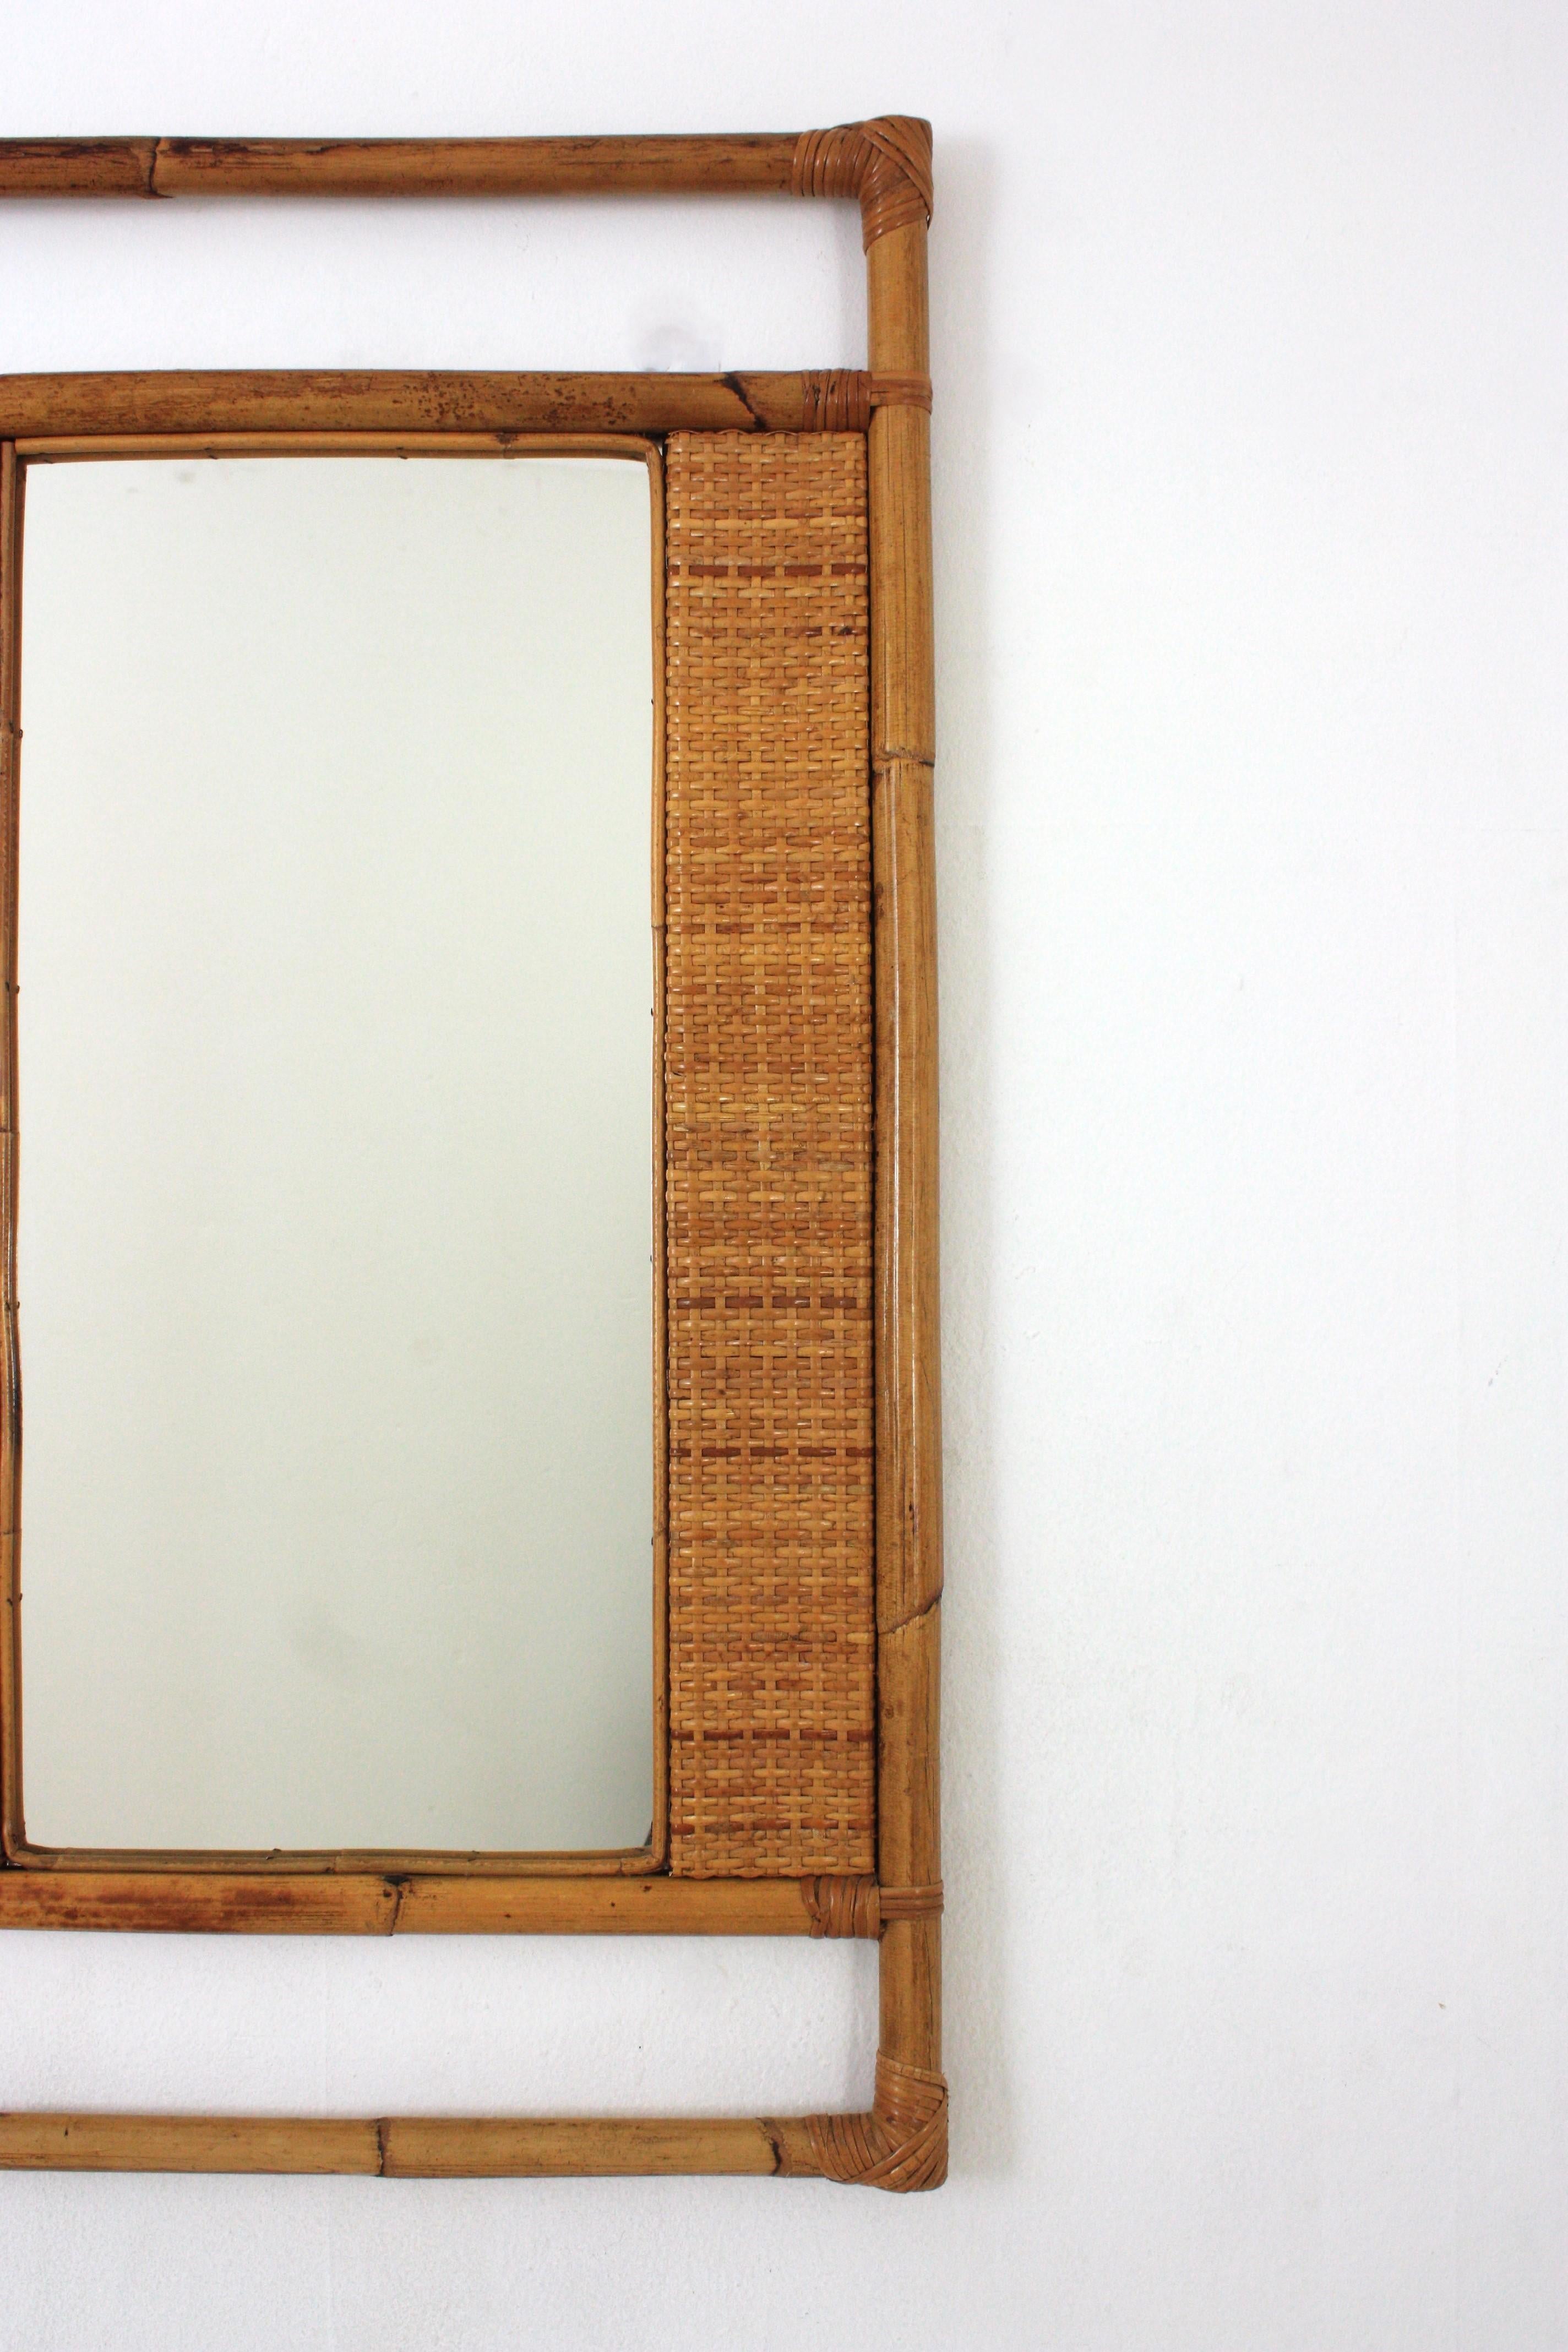 20th Century Spanish Rectangular Rattan Wall Mirror with Geometric Woven Frame For Sale